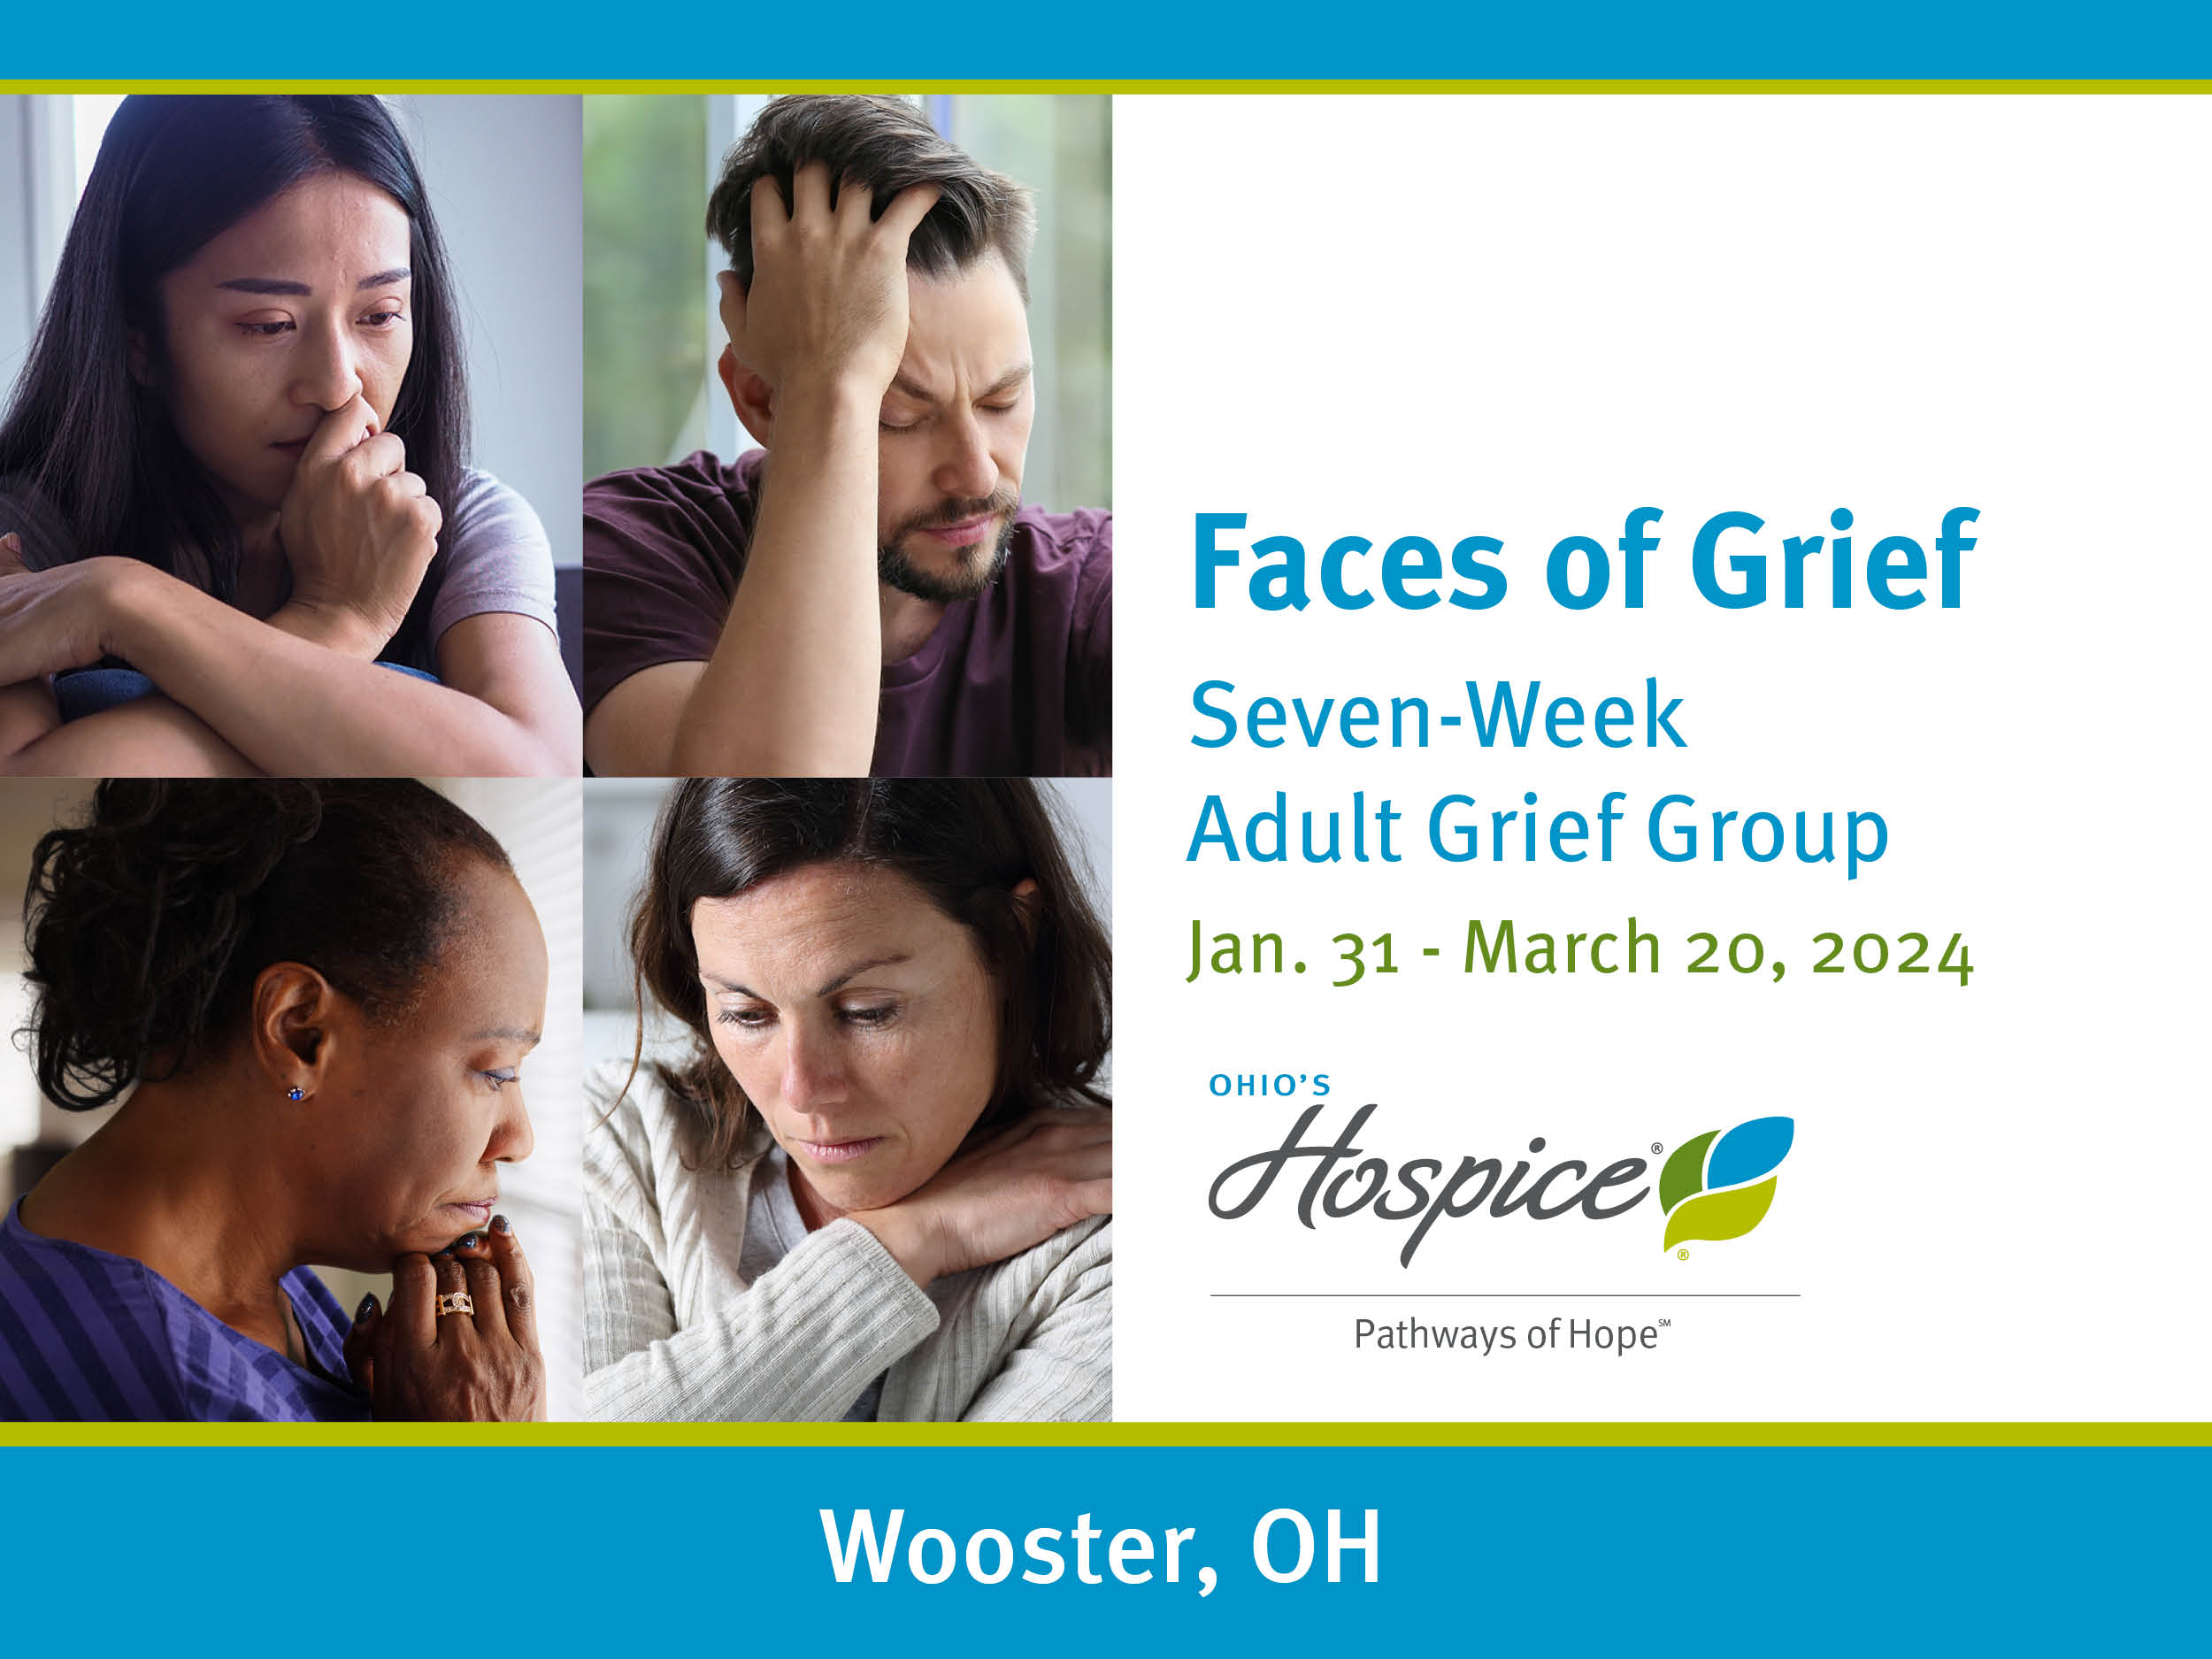 Faces of Grief Seven-Week Adult Grief Group Jan. 31 - March 20, 2024